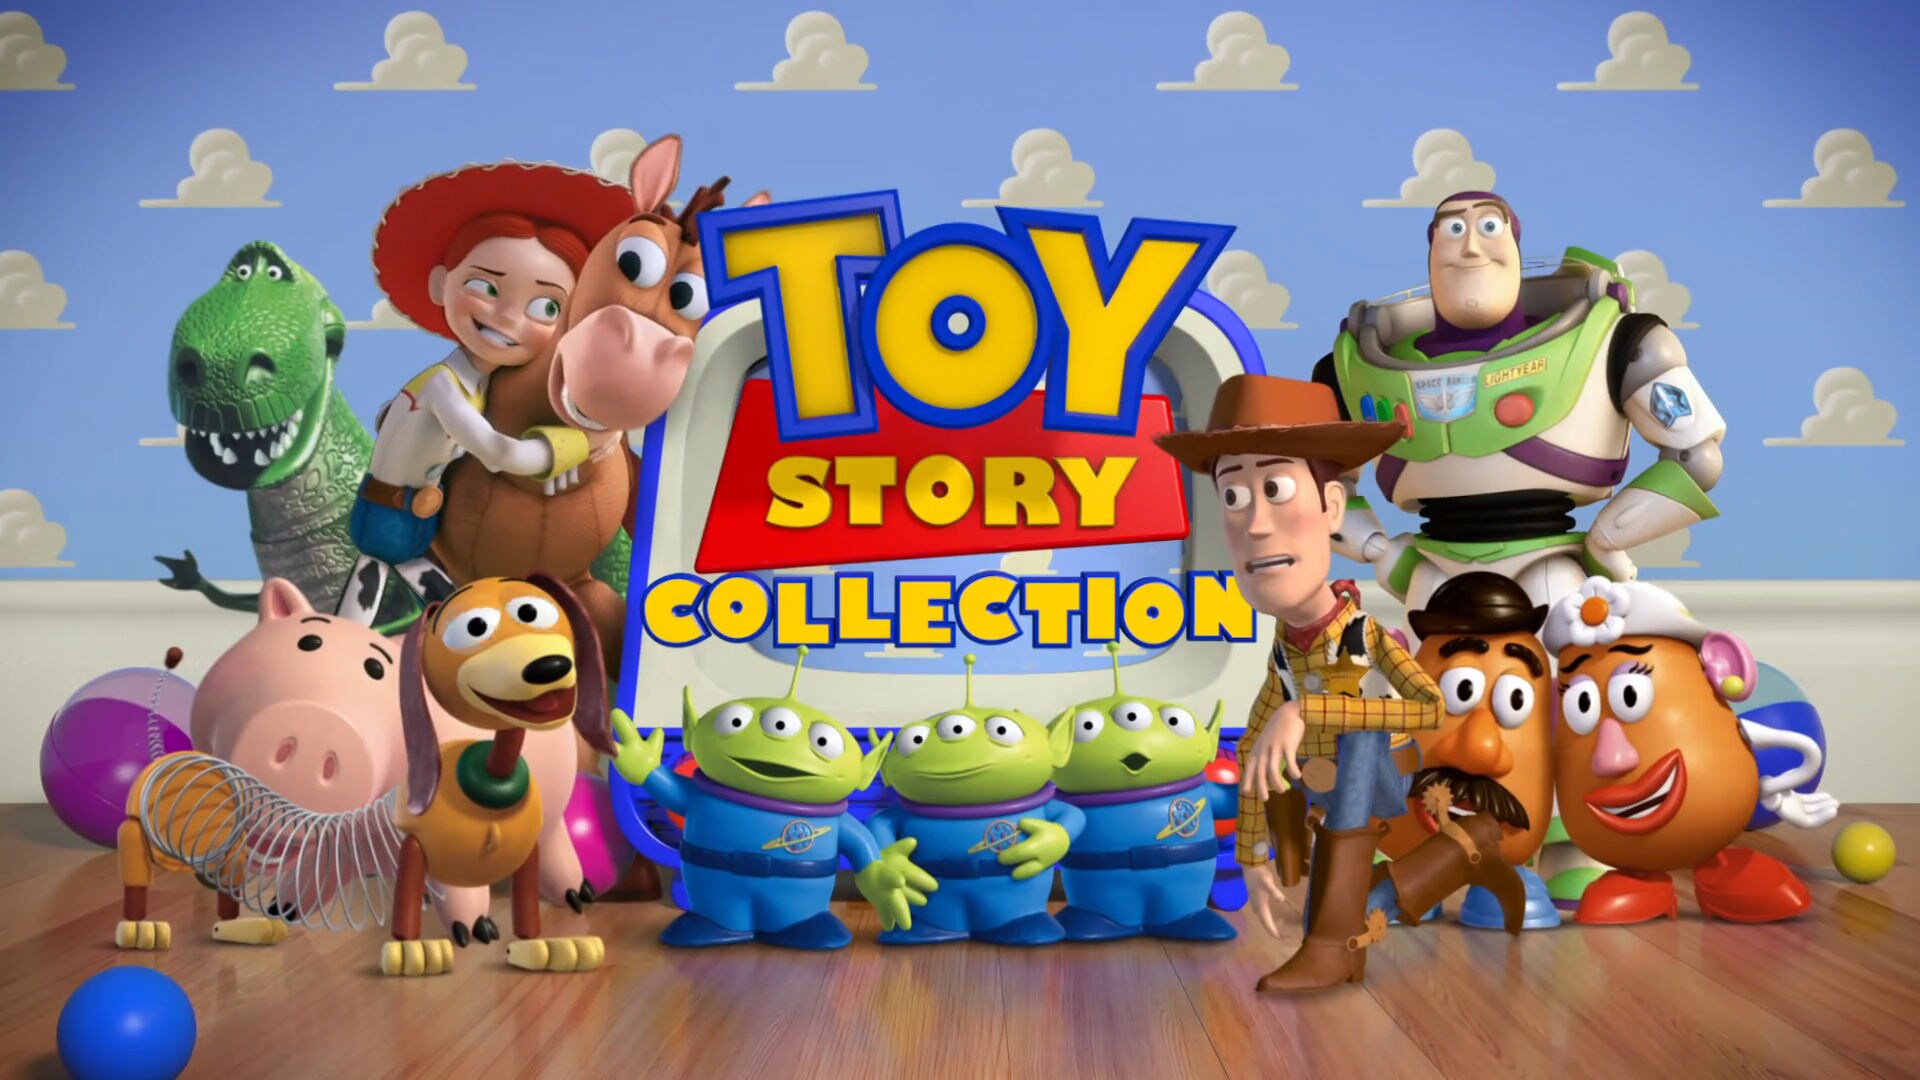 Toy Story 3 download the new